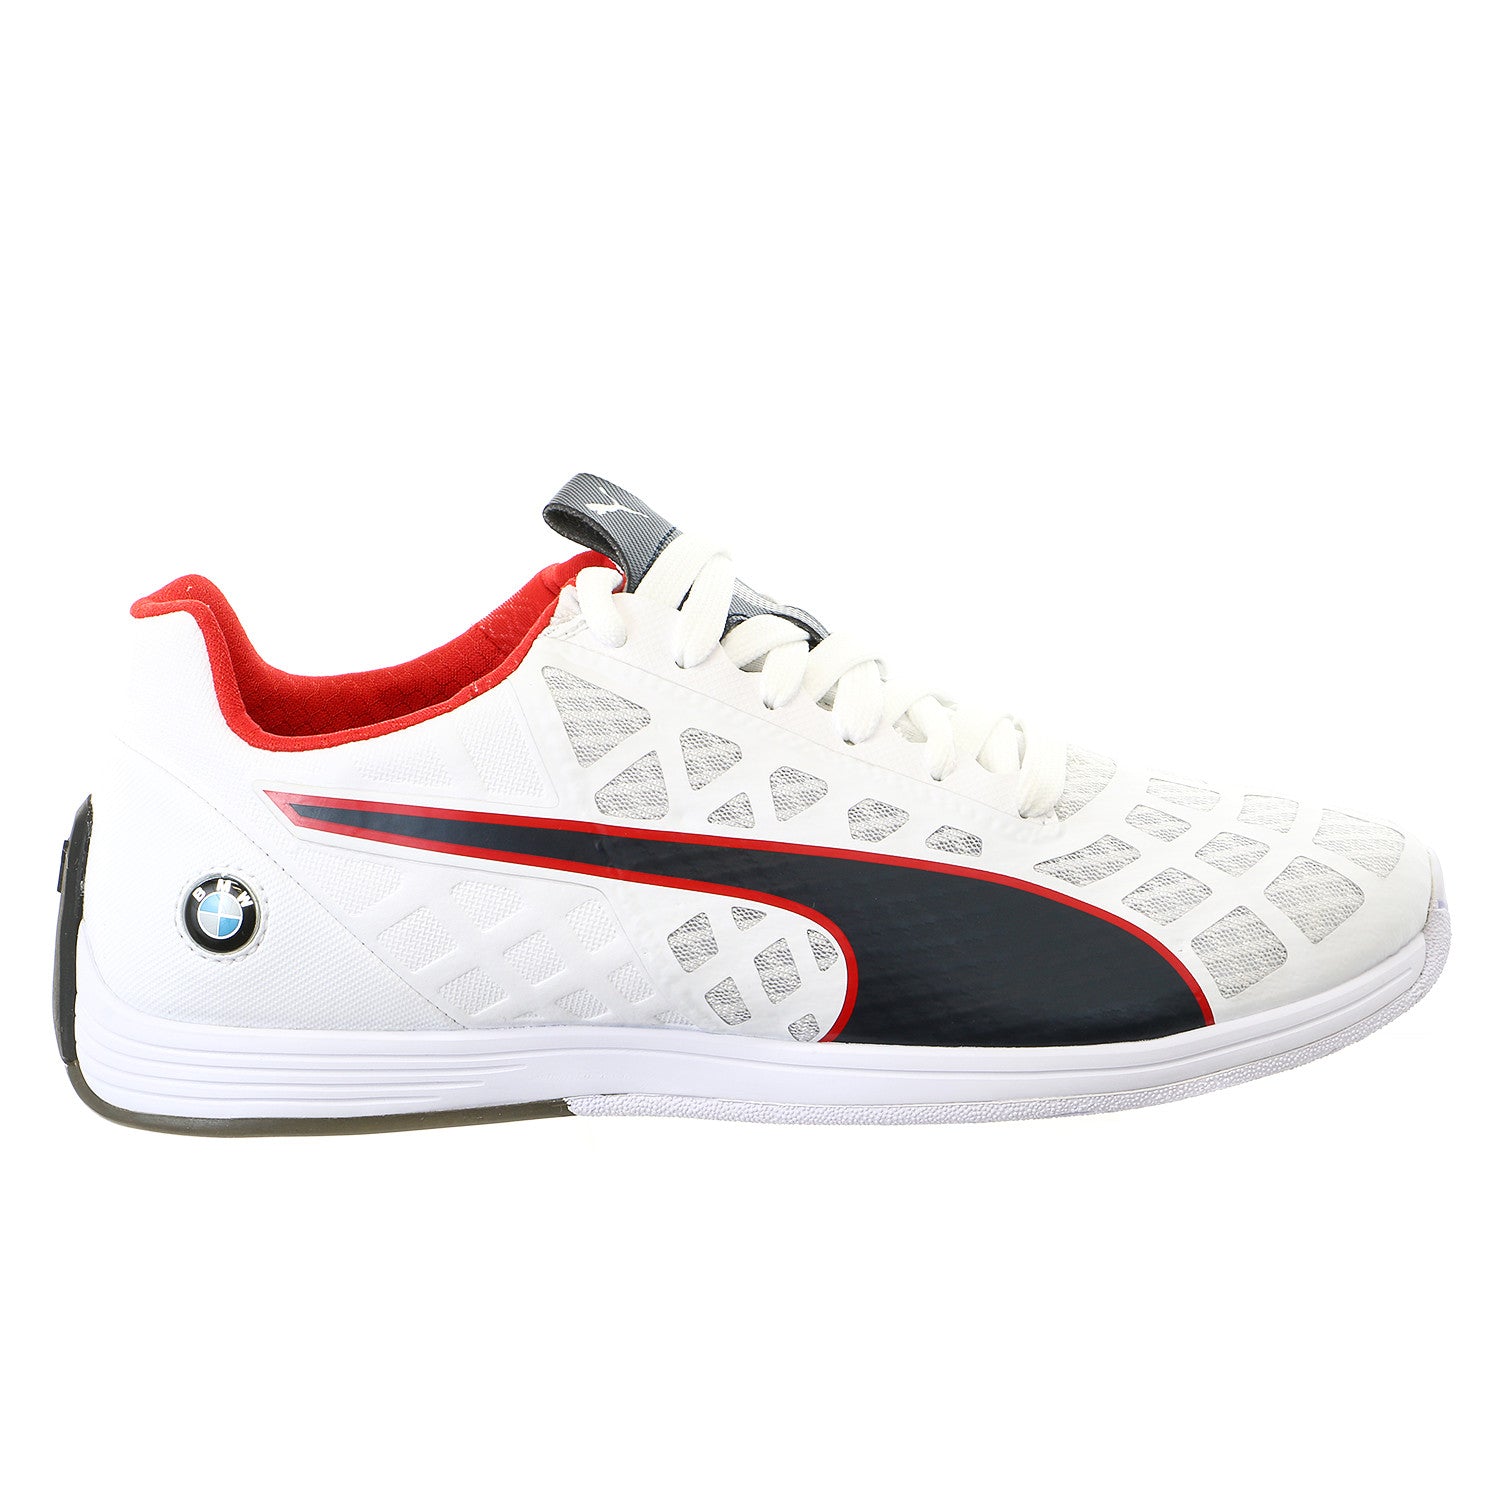 Buy Puma Perforated Low Men's Idp White Shoes Online